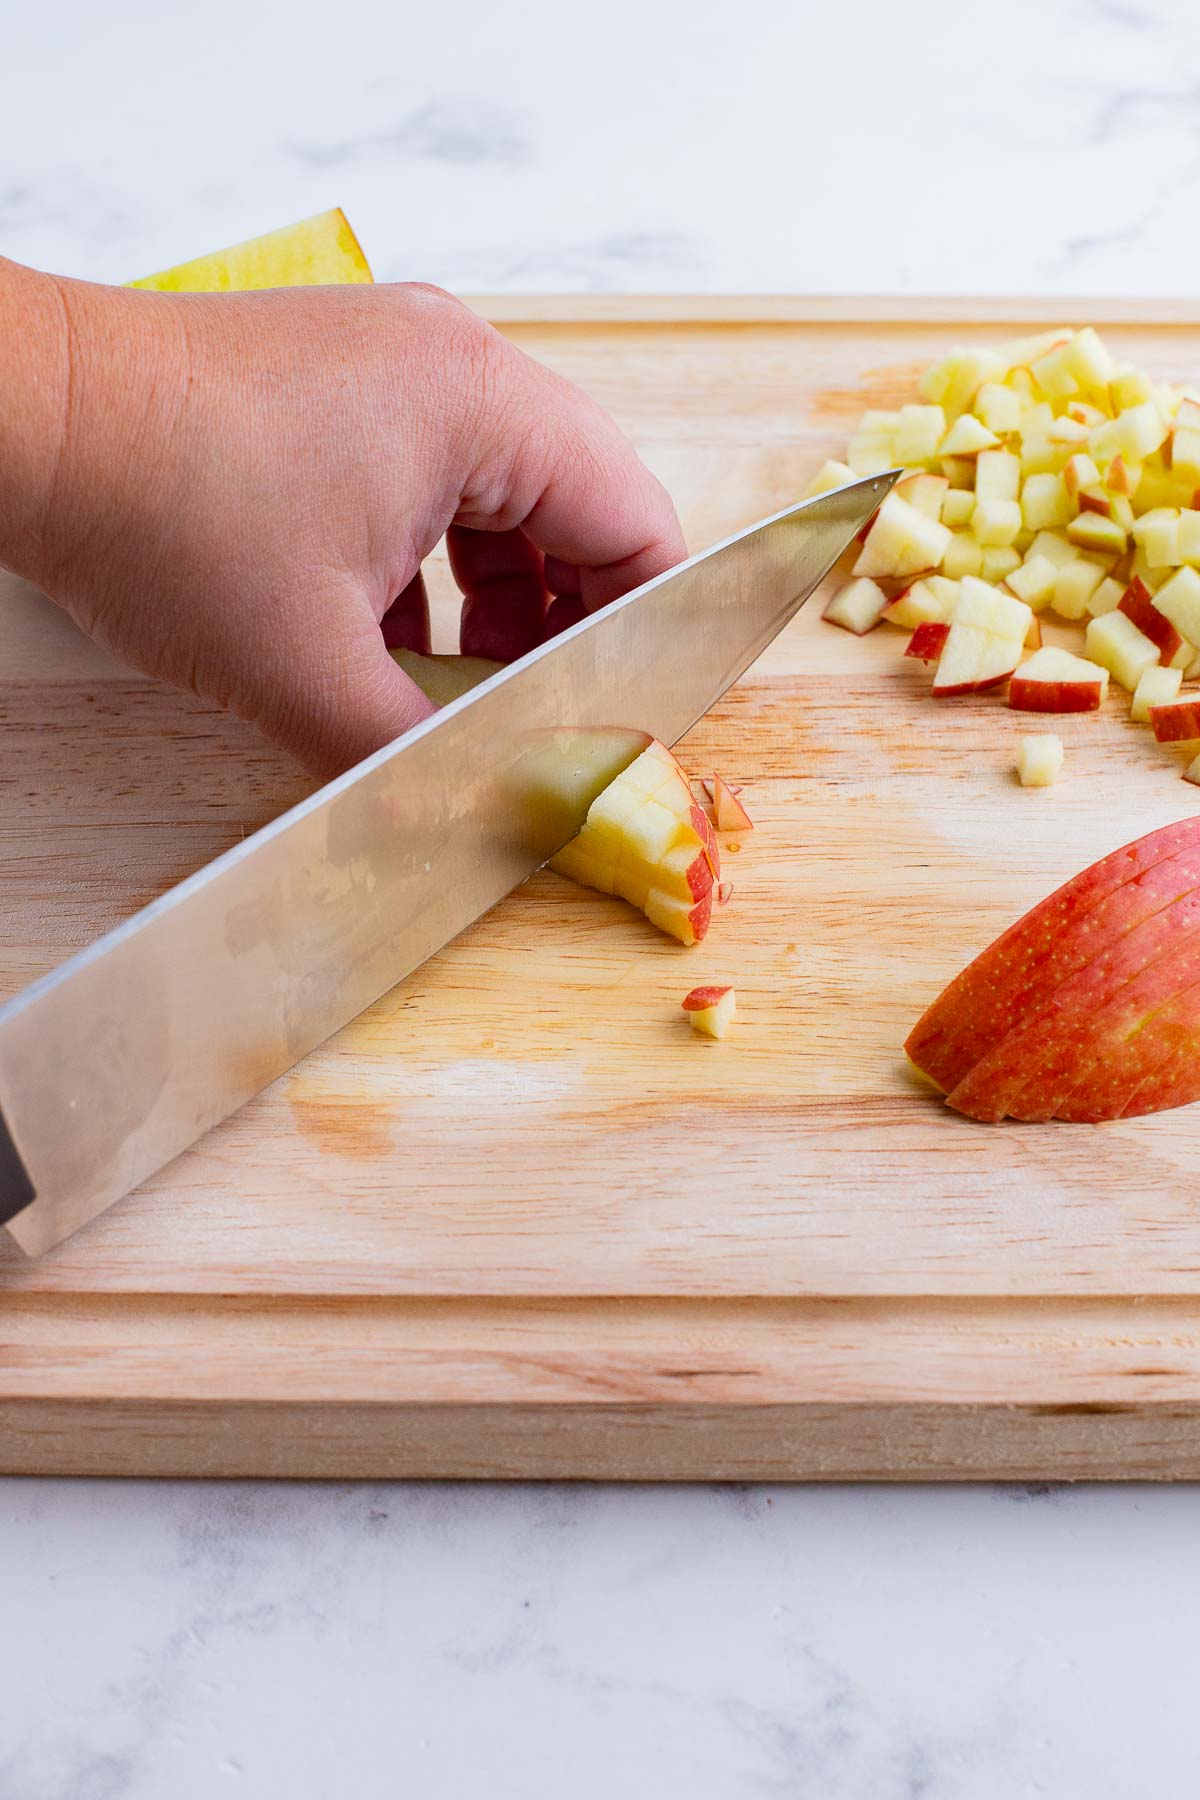 An apple is sliced before being added to the mix.